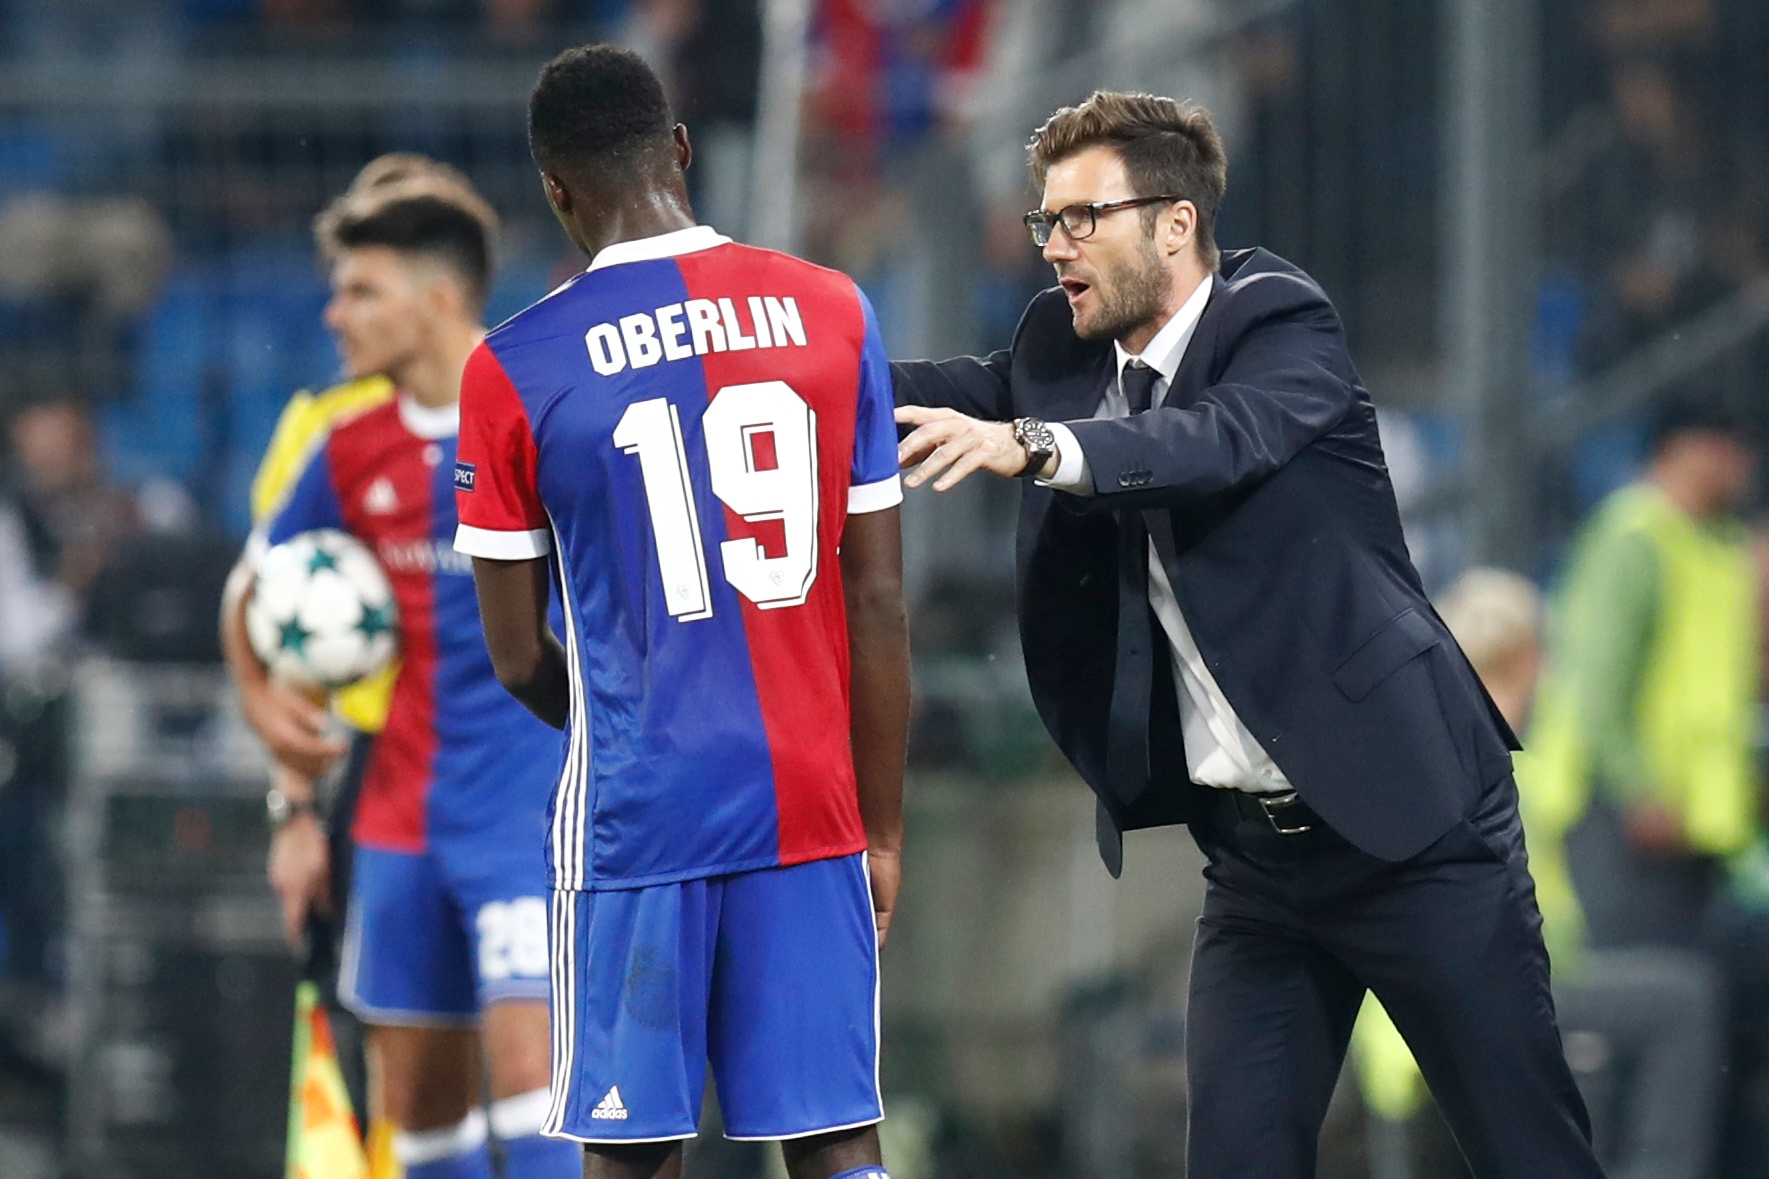 Basel's Dimitri Oberlin, left, and his head coach Raphael Wicky interact during an UEFA Champions League Group stage Group A matchday 2 soccer match between Switzerland's FC Basel 1893 and Portugal's SL Benfica in the St. Jakob-Park stadium in Basel, Switzerland, on Wednesday, September 27, 2017. (KEYSTONE/Peter Klaunzer) SWITZERLAND SOCCER CHAMPIONS LEAGUE BASEL BENFICA